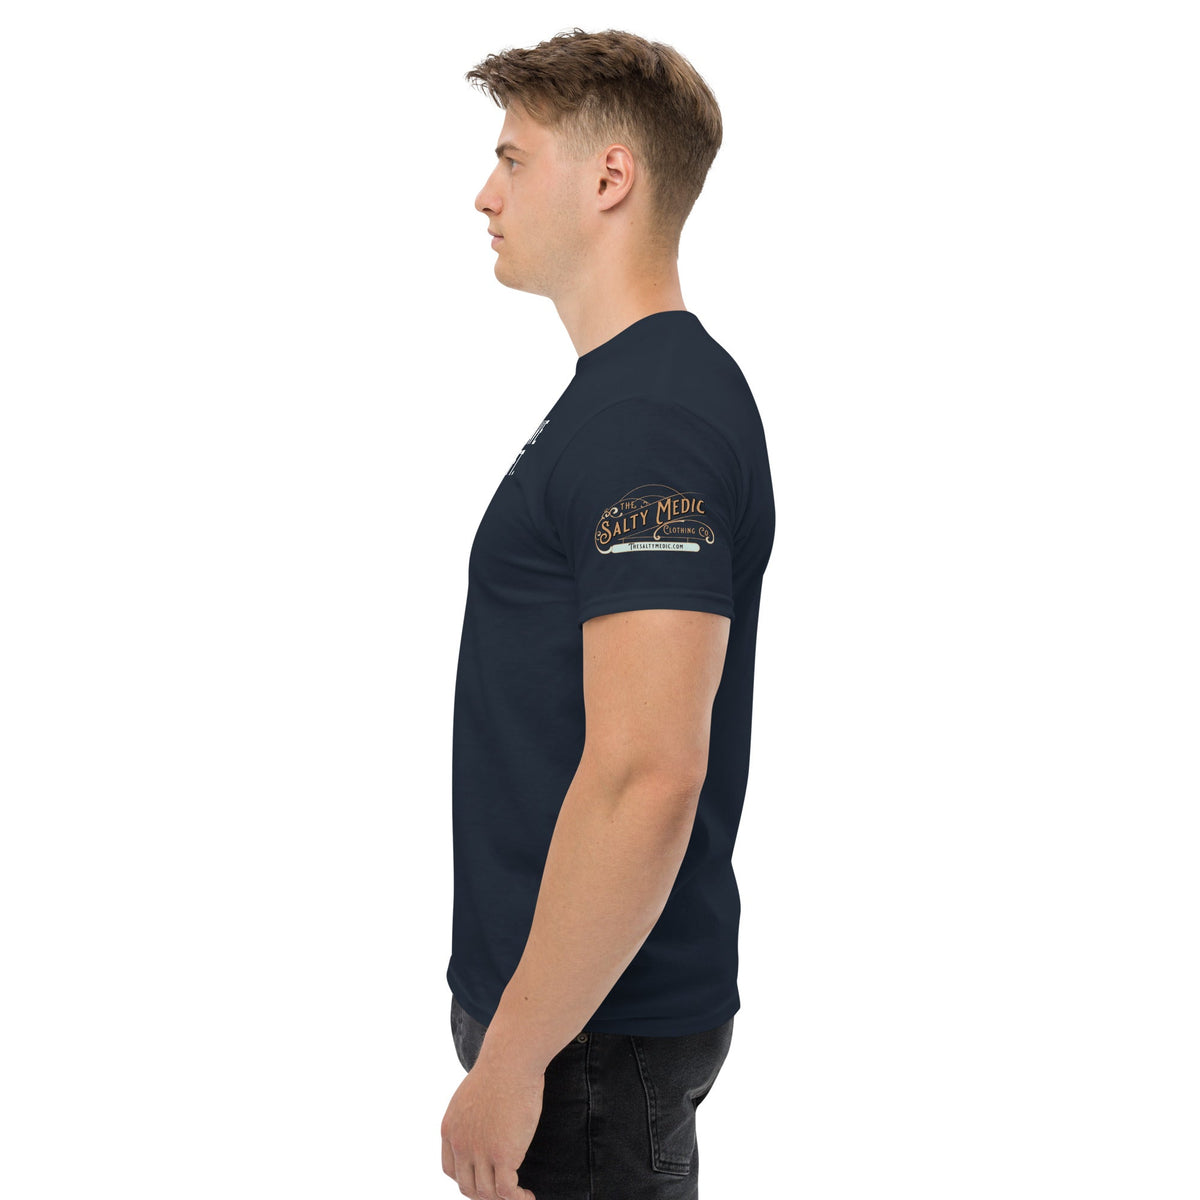 I hope you have a quiet shift Men's classic tee - Salty Medic Clothing Co.